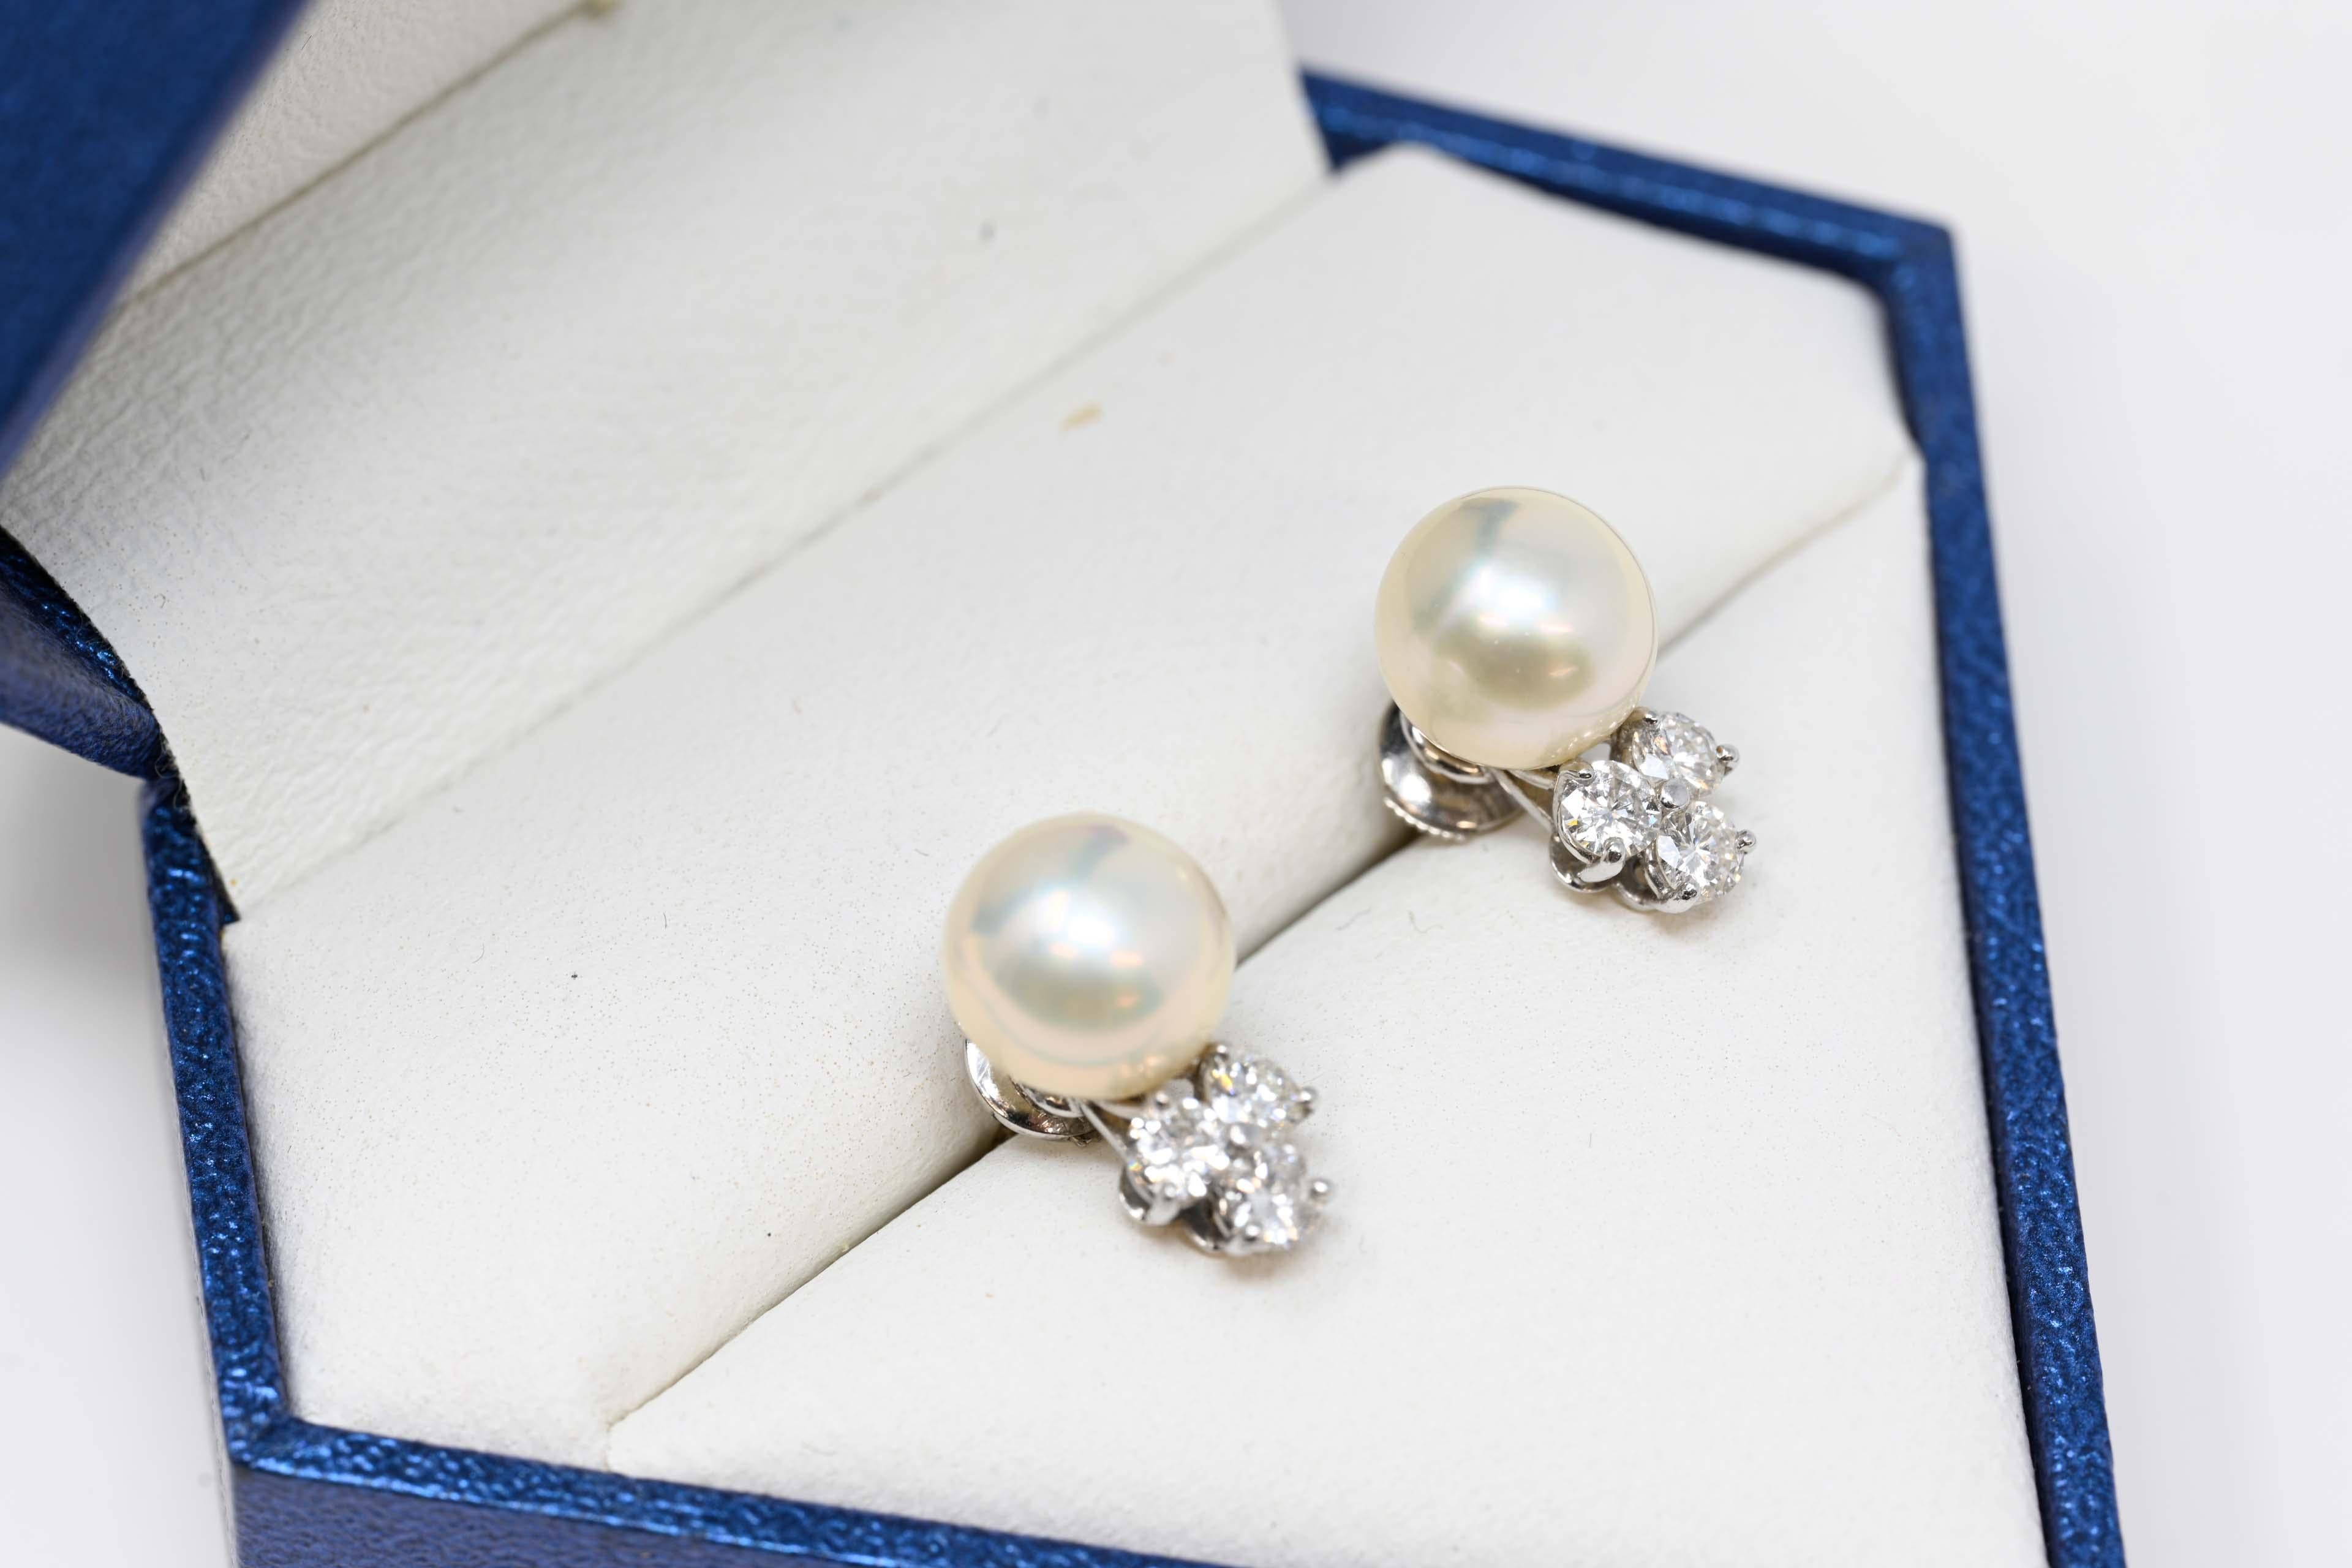 14k white gold earring set with 9 1/2-10mm Akoya pearl and 3 diamonds of .10ct each, clarity VVS-VS and color G. Stamped 14k  585, In good condition.